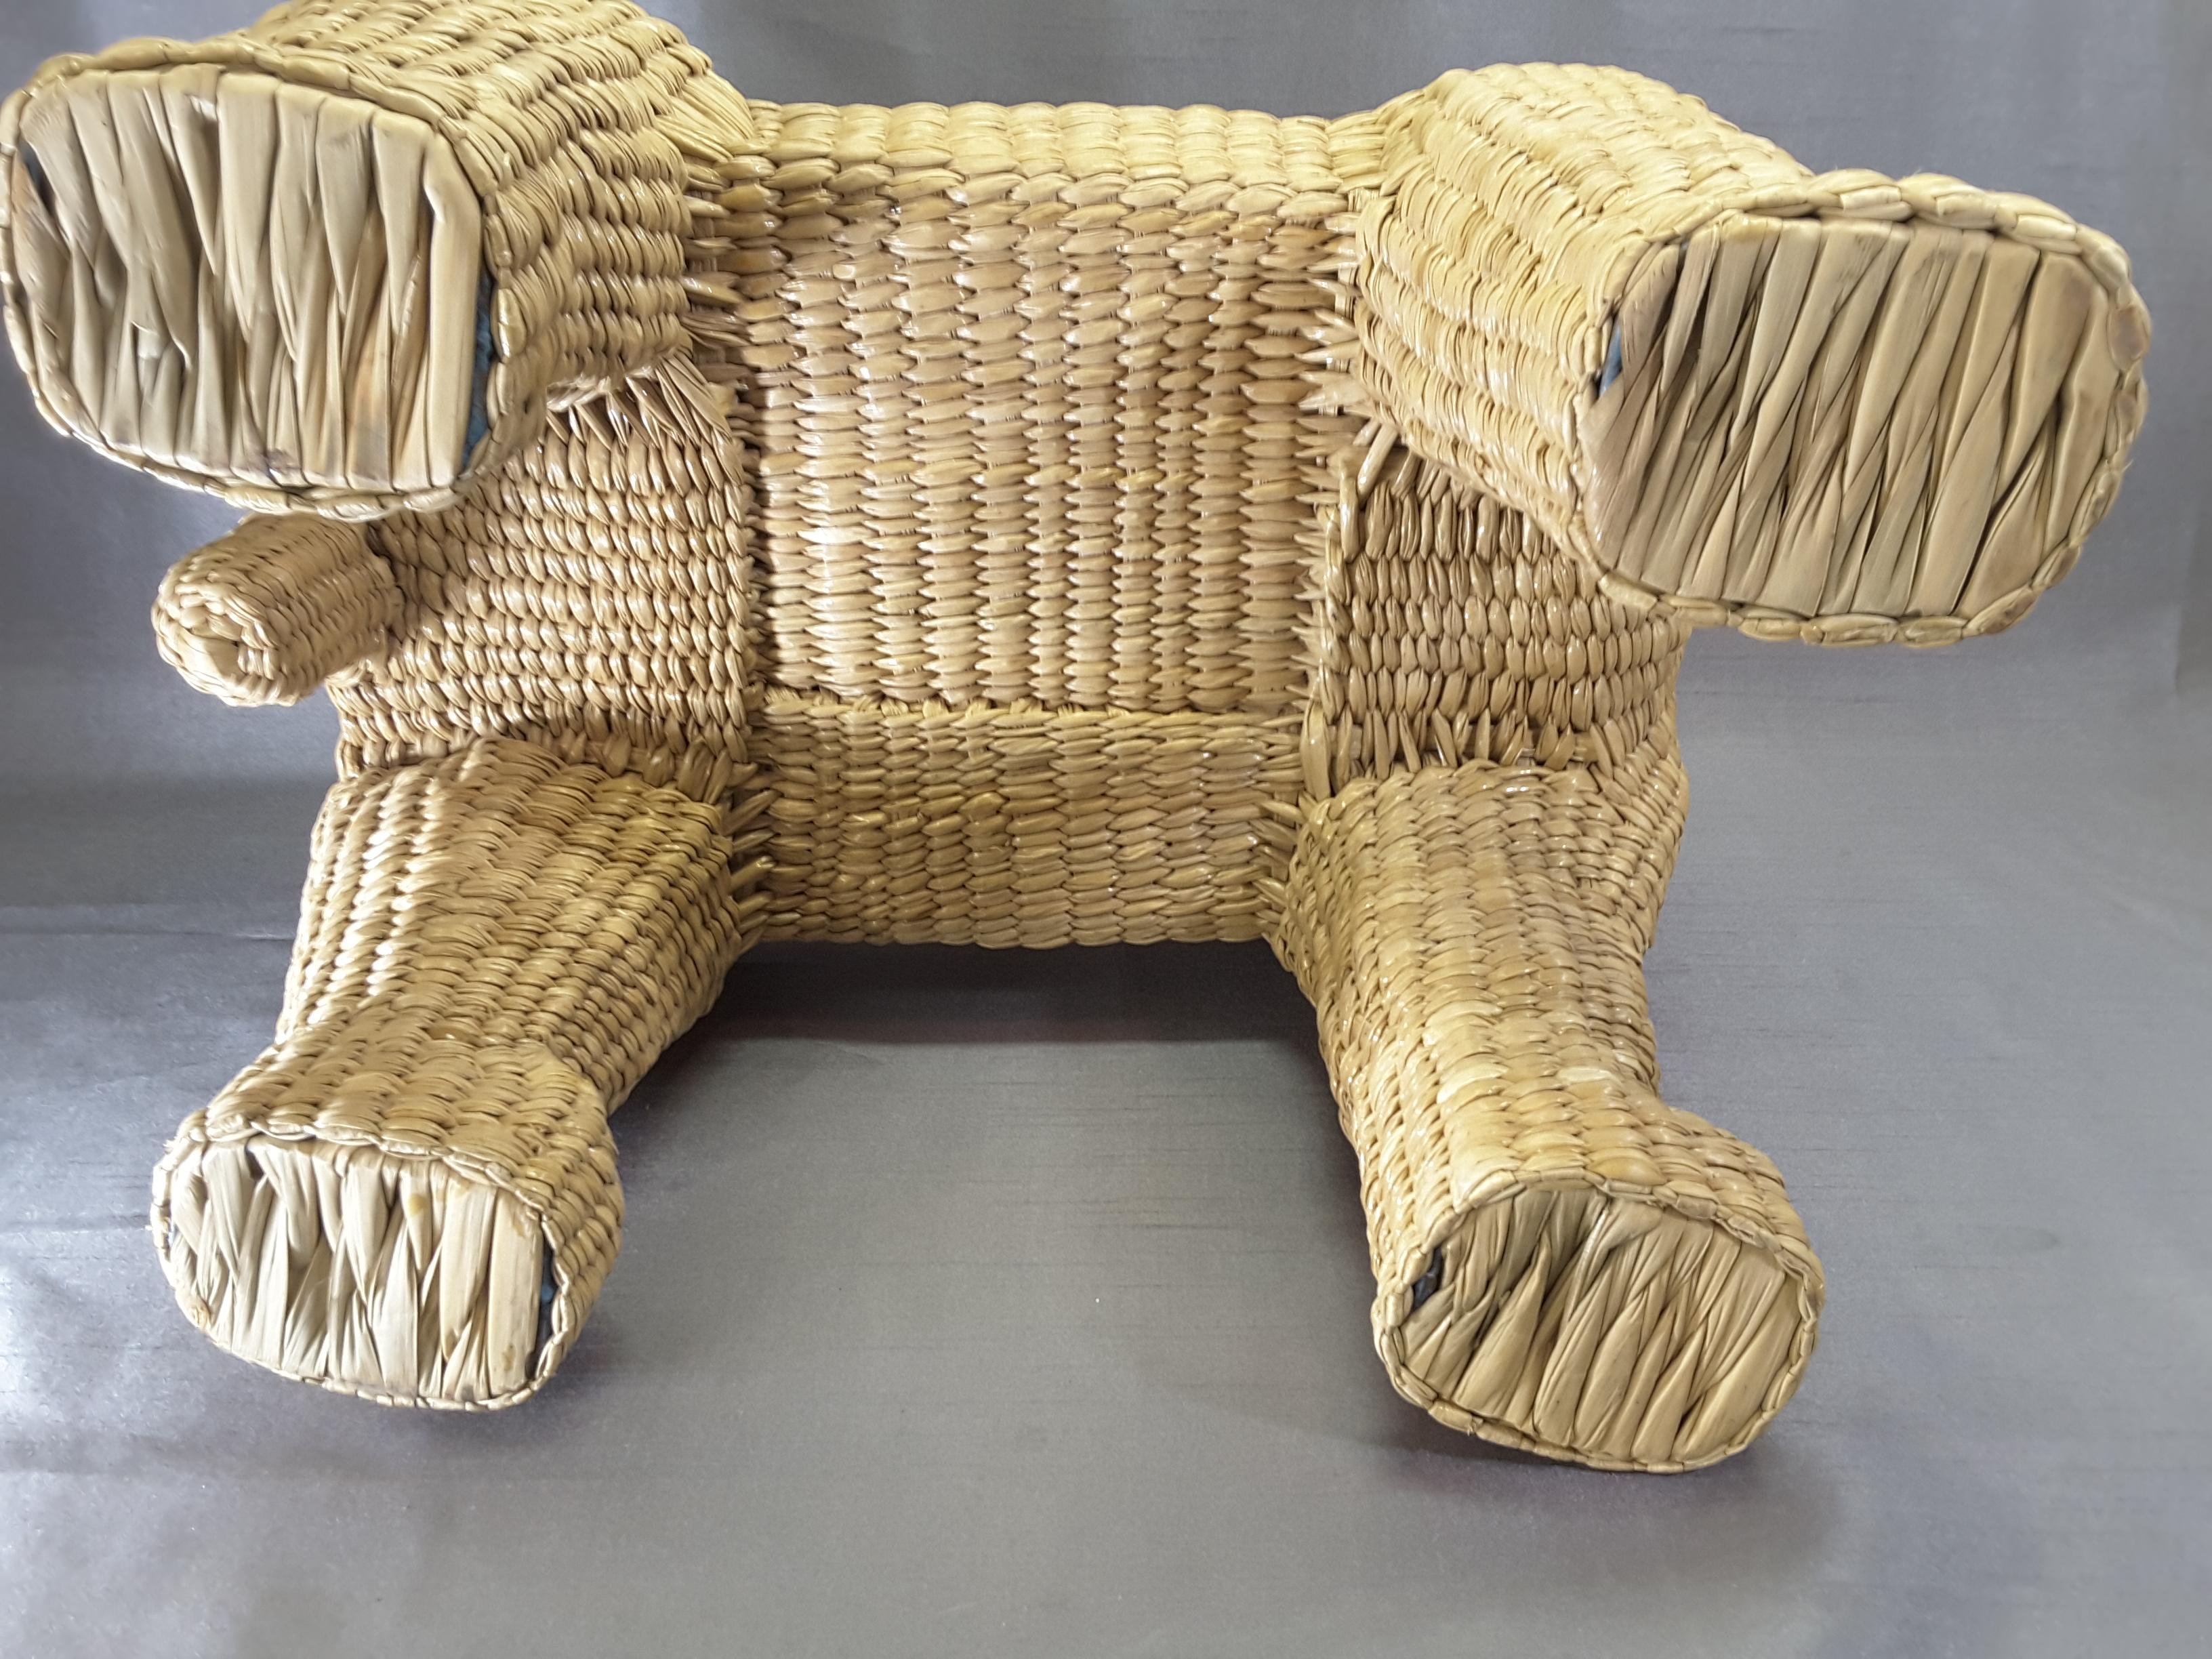 Mario Lopez Torres Wicker Panther Stool, Early 1970s For Sale 8